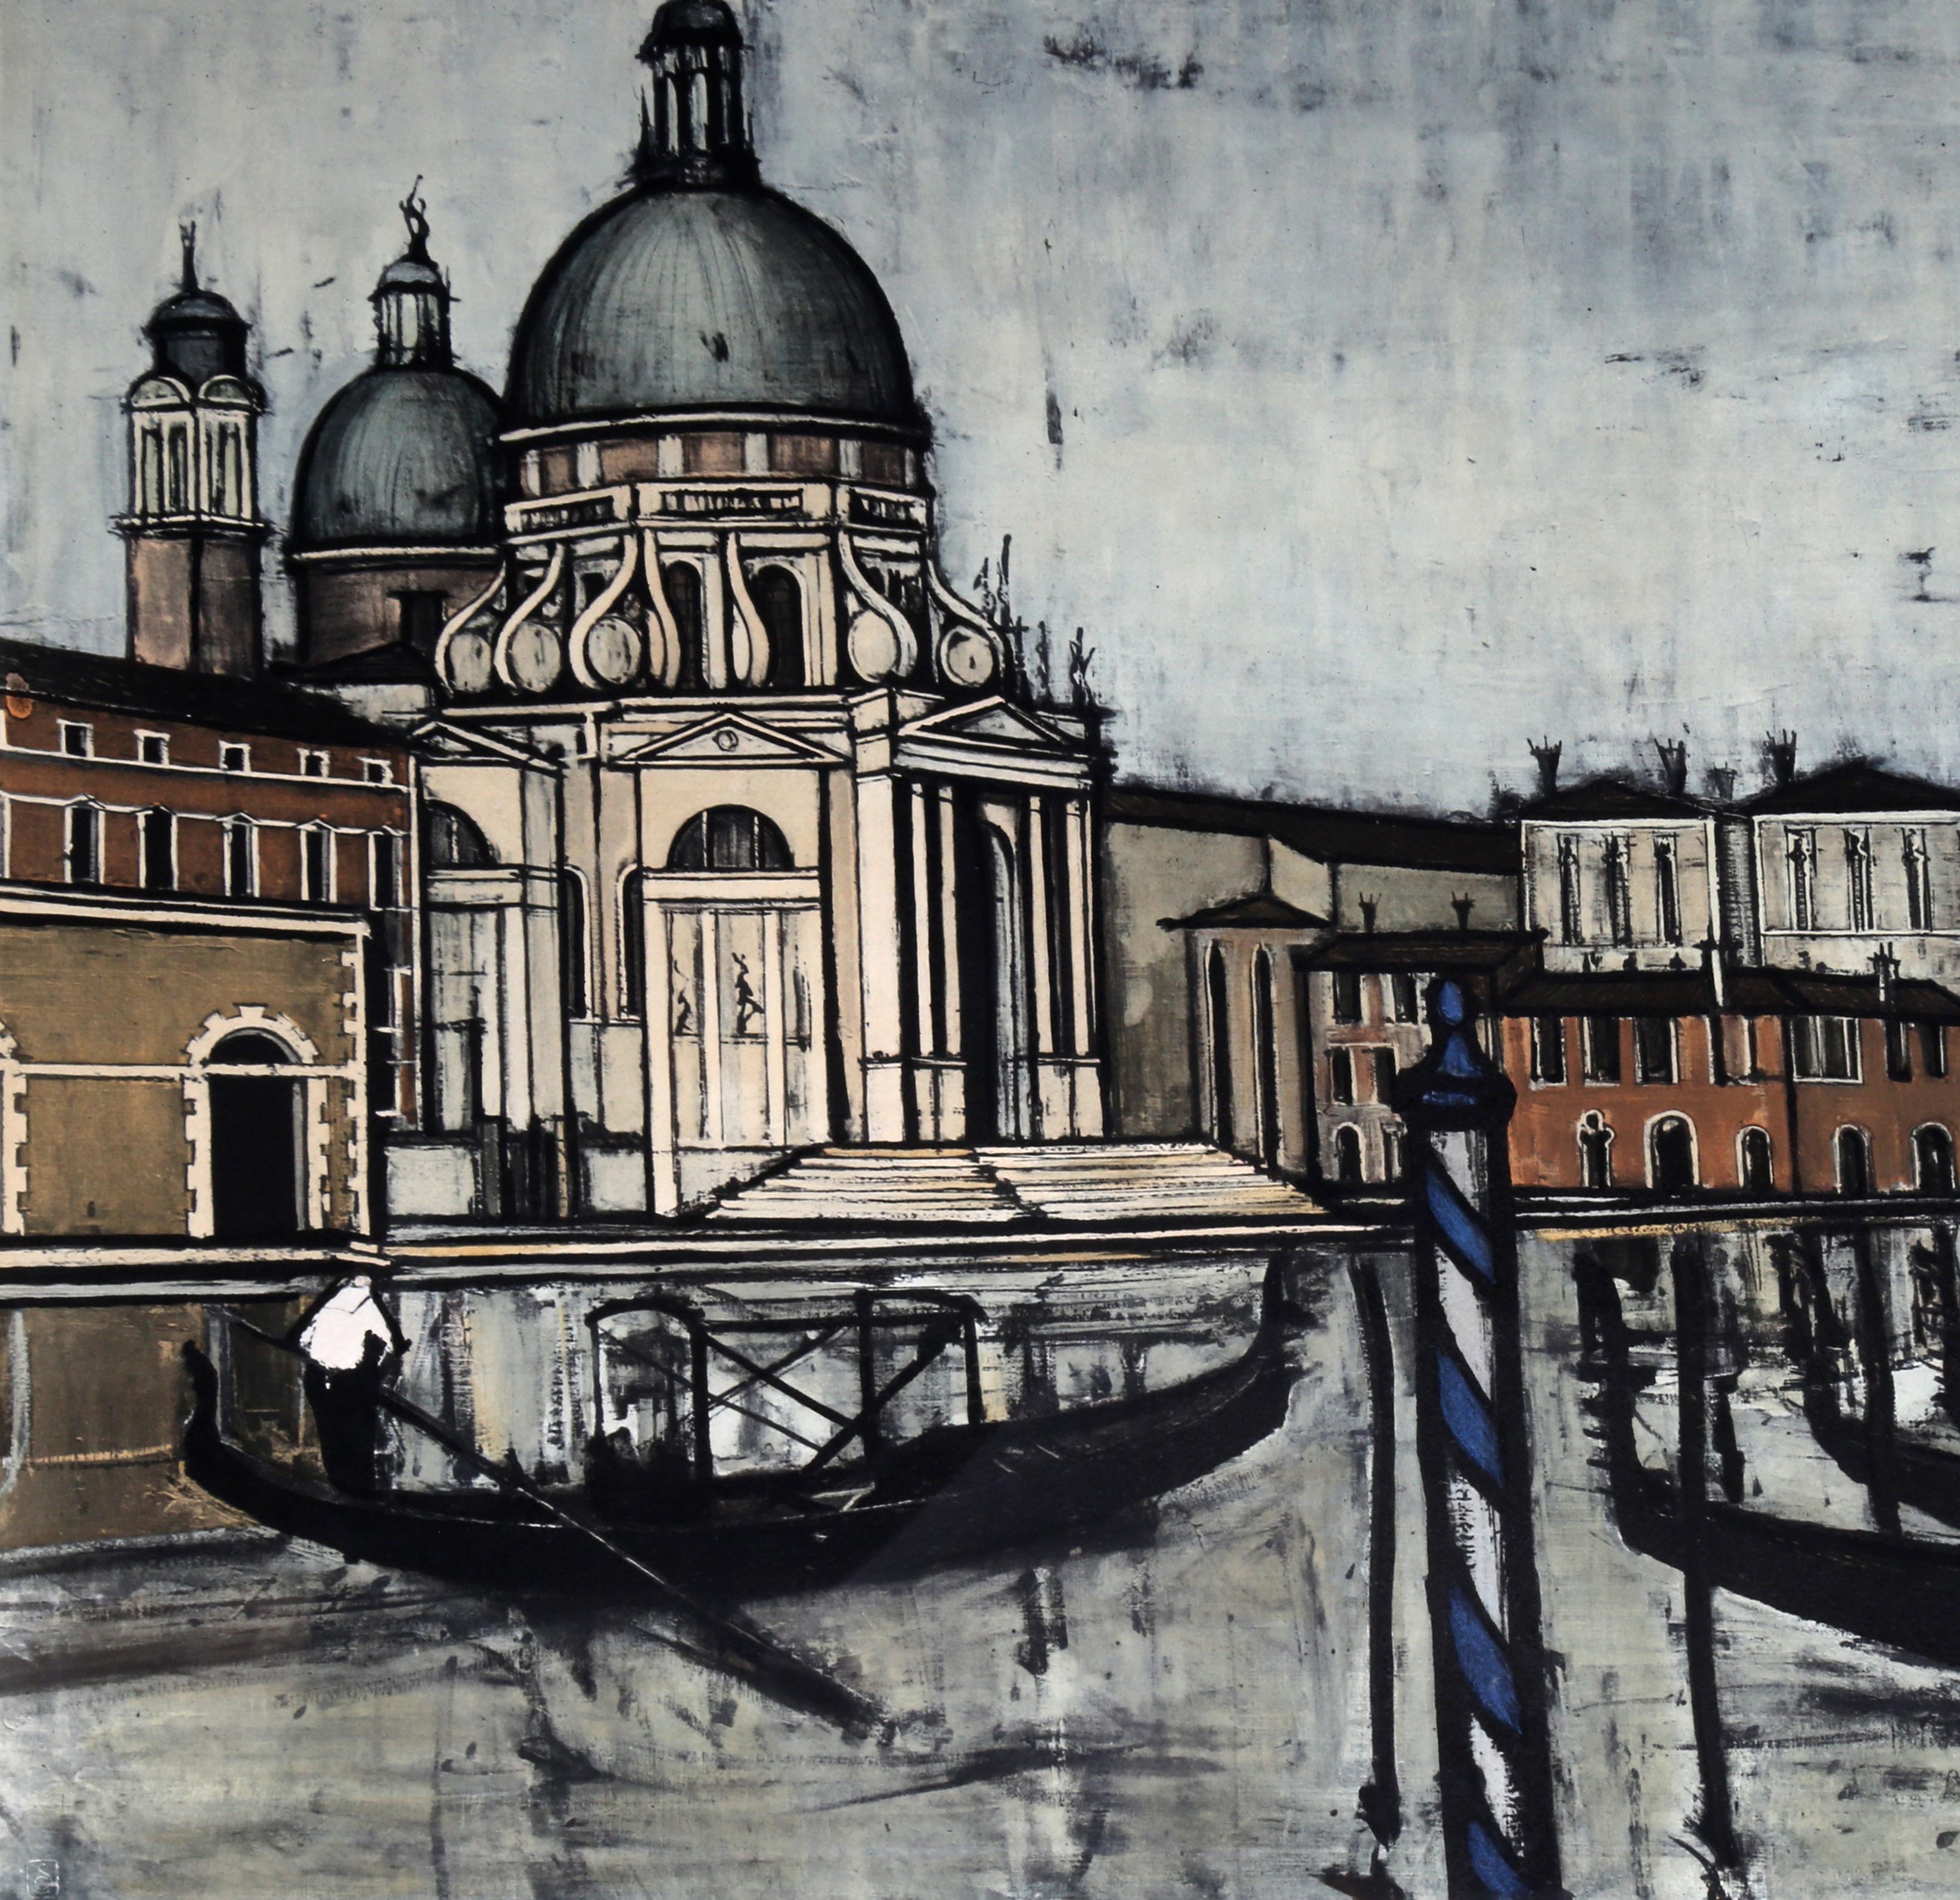 Artist: Bernard Buffet, French (1928 - 1999)
Title: Venise
Year: 1957
Medium: Collotype on Arches Paper, signed and numbered in pencil
Edition: 71/300
Image: 21.5 x 36 inches
Size: 28 x 42 in. (71.12 x 106.68 cm)
Frame: 35 x 47 inches

Published by